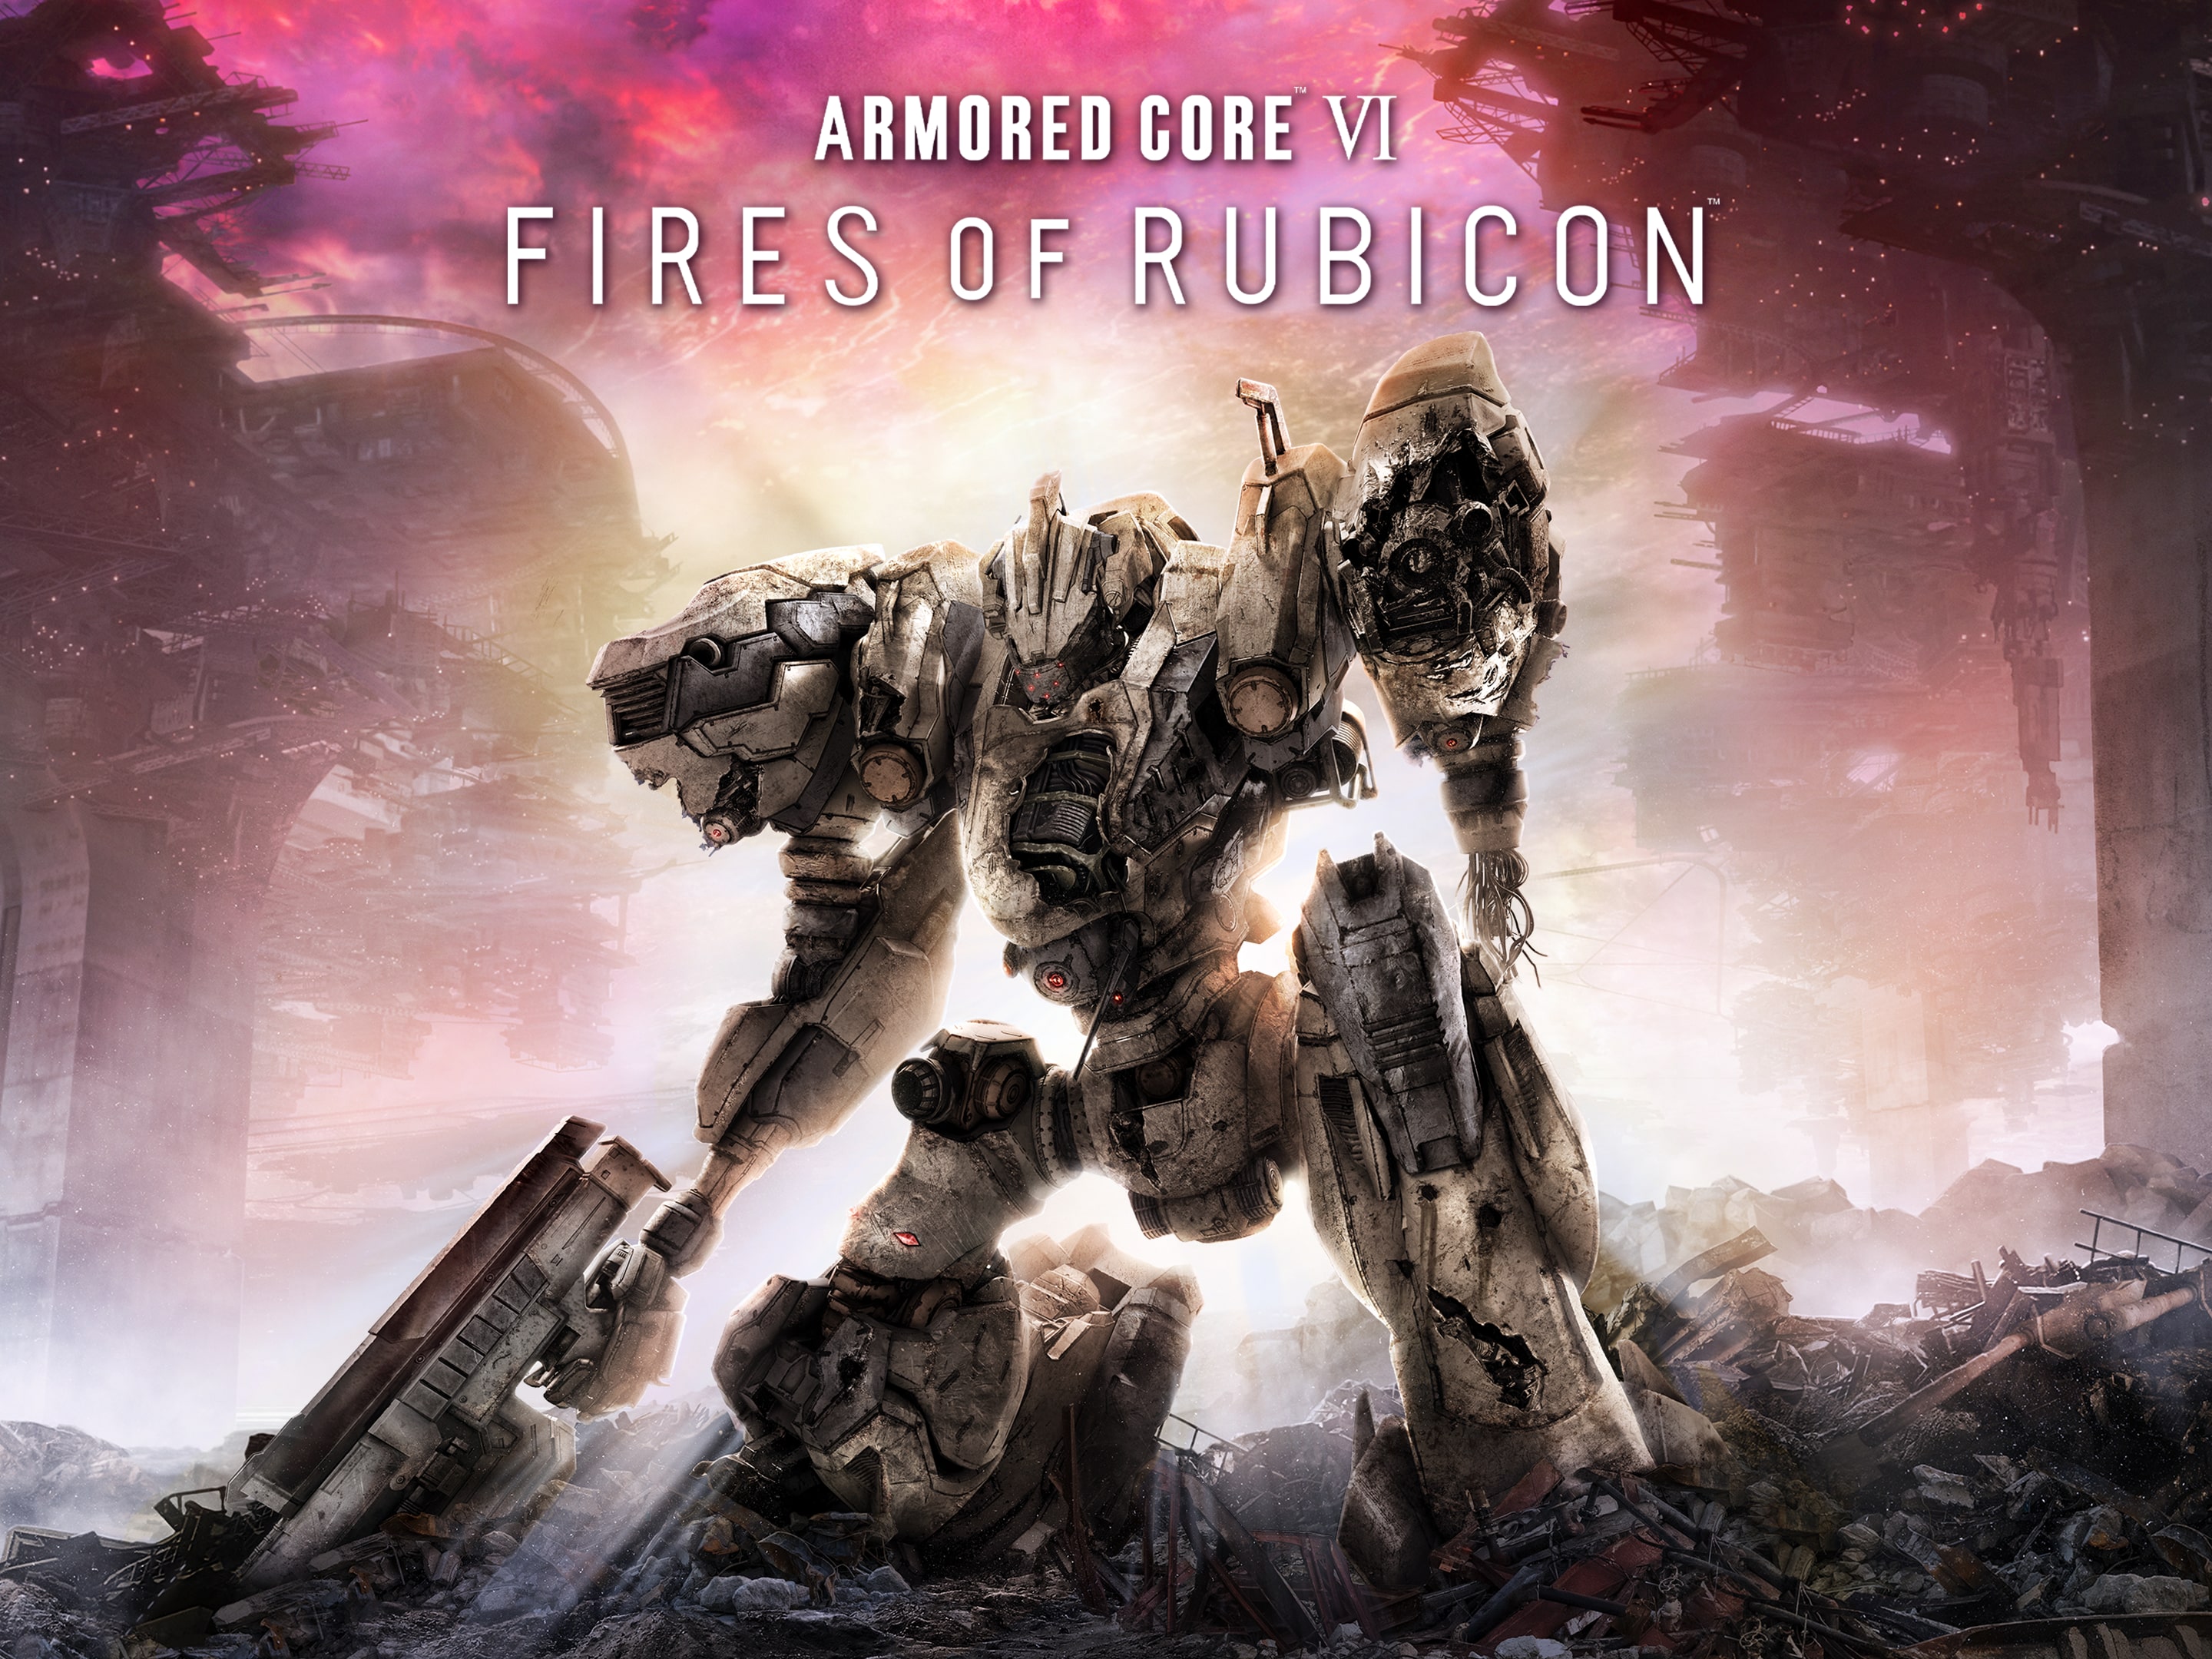 Armored Core VI Fires of Rubicon | PlayStation (Canada)